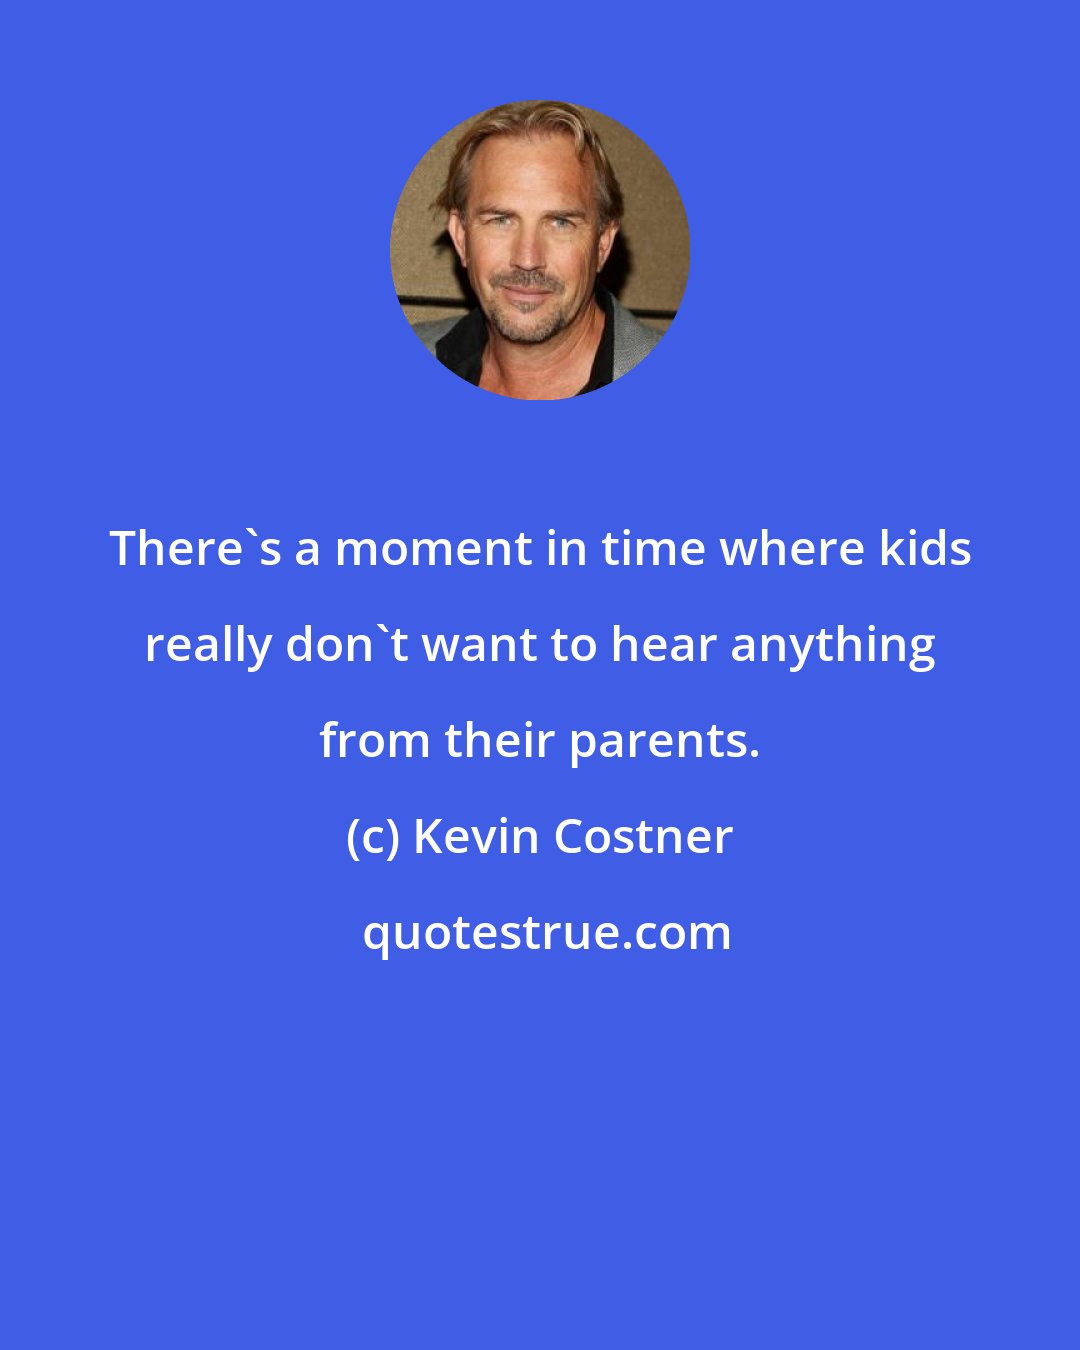 Kevin Costner: There's a moment in time where kids really don't want to hear anything from their parents.